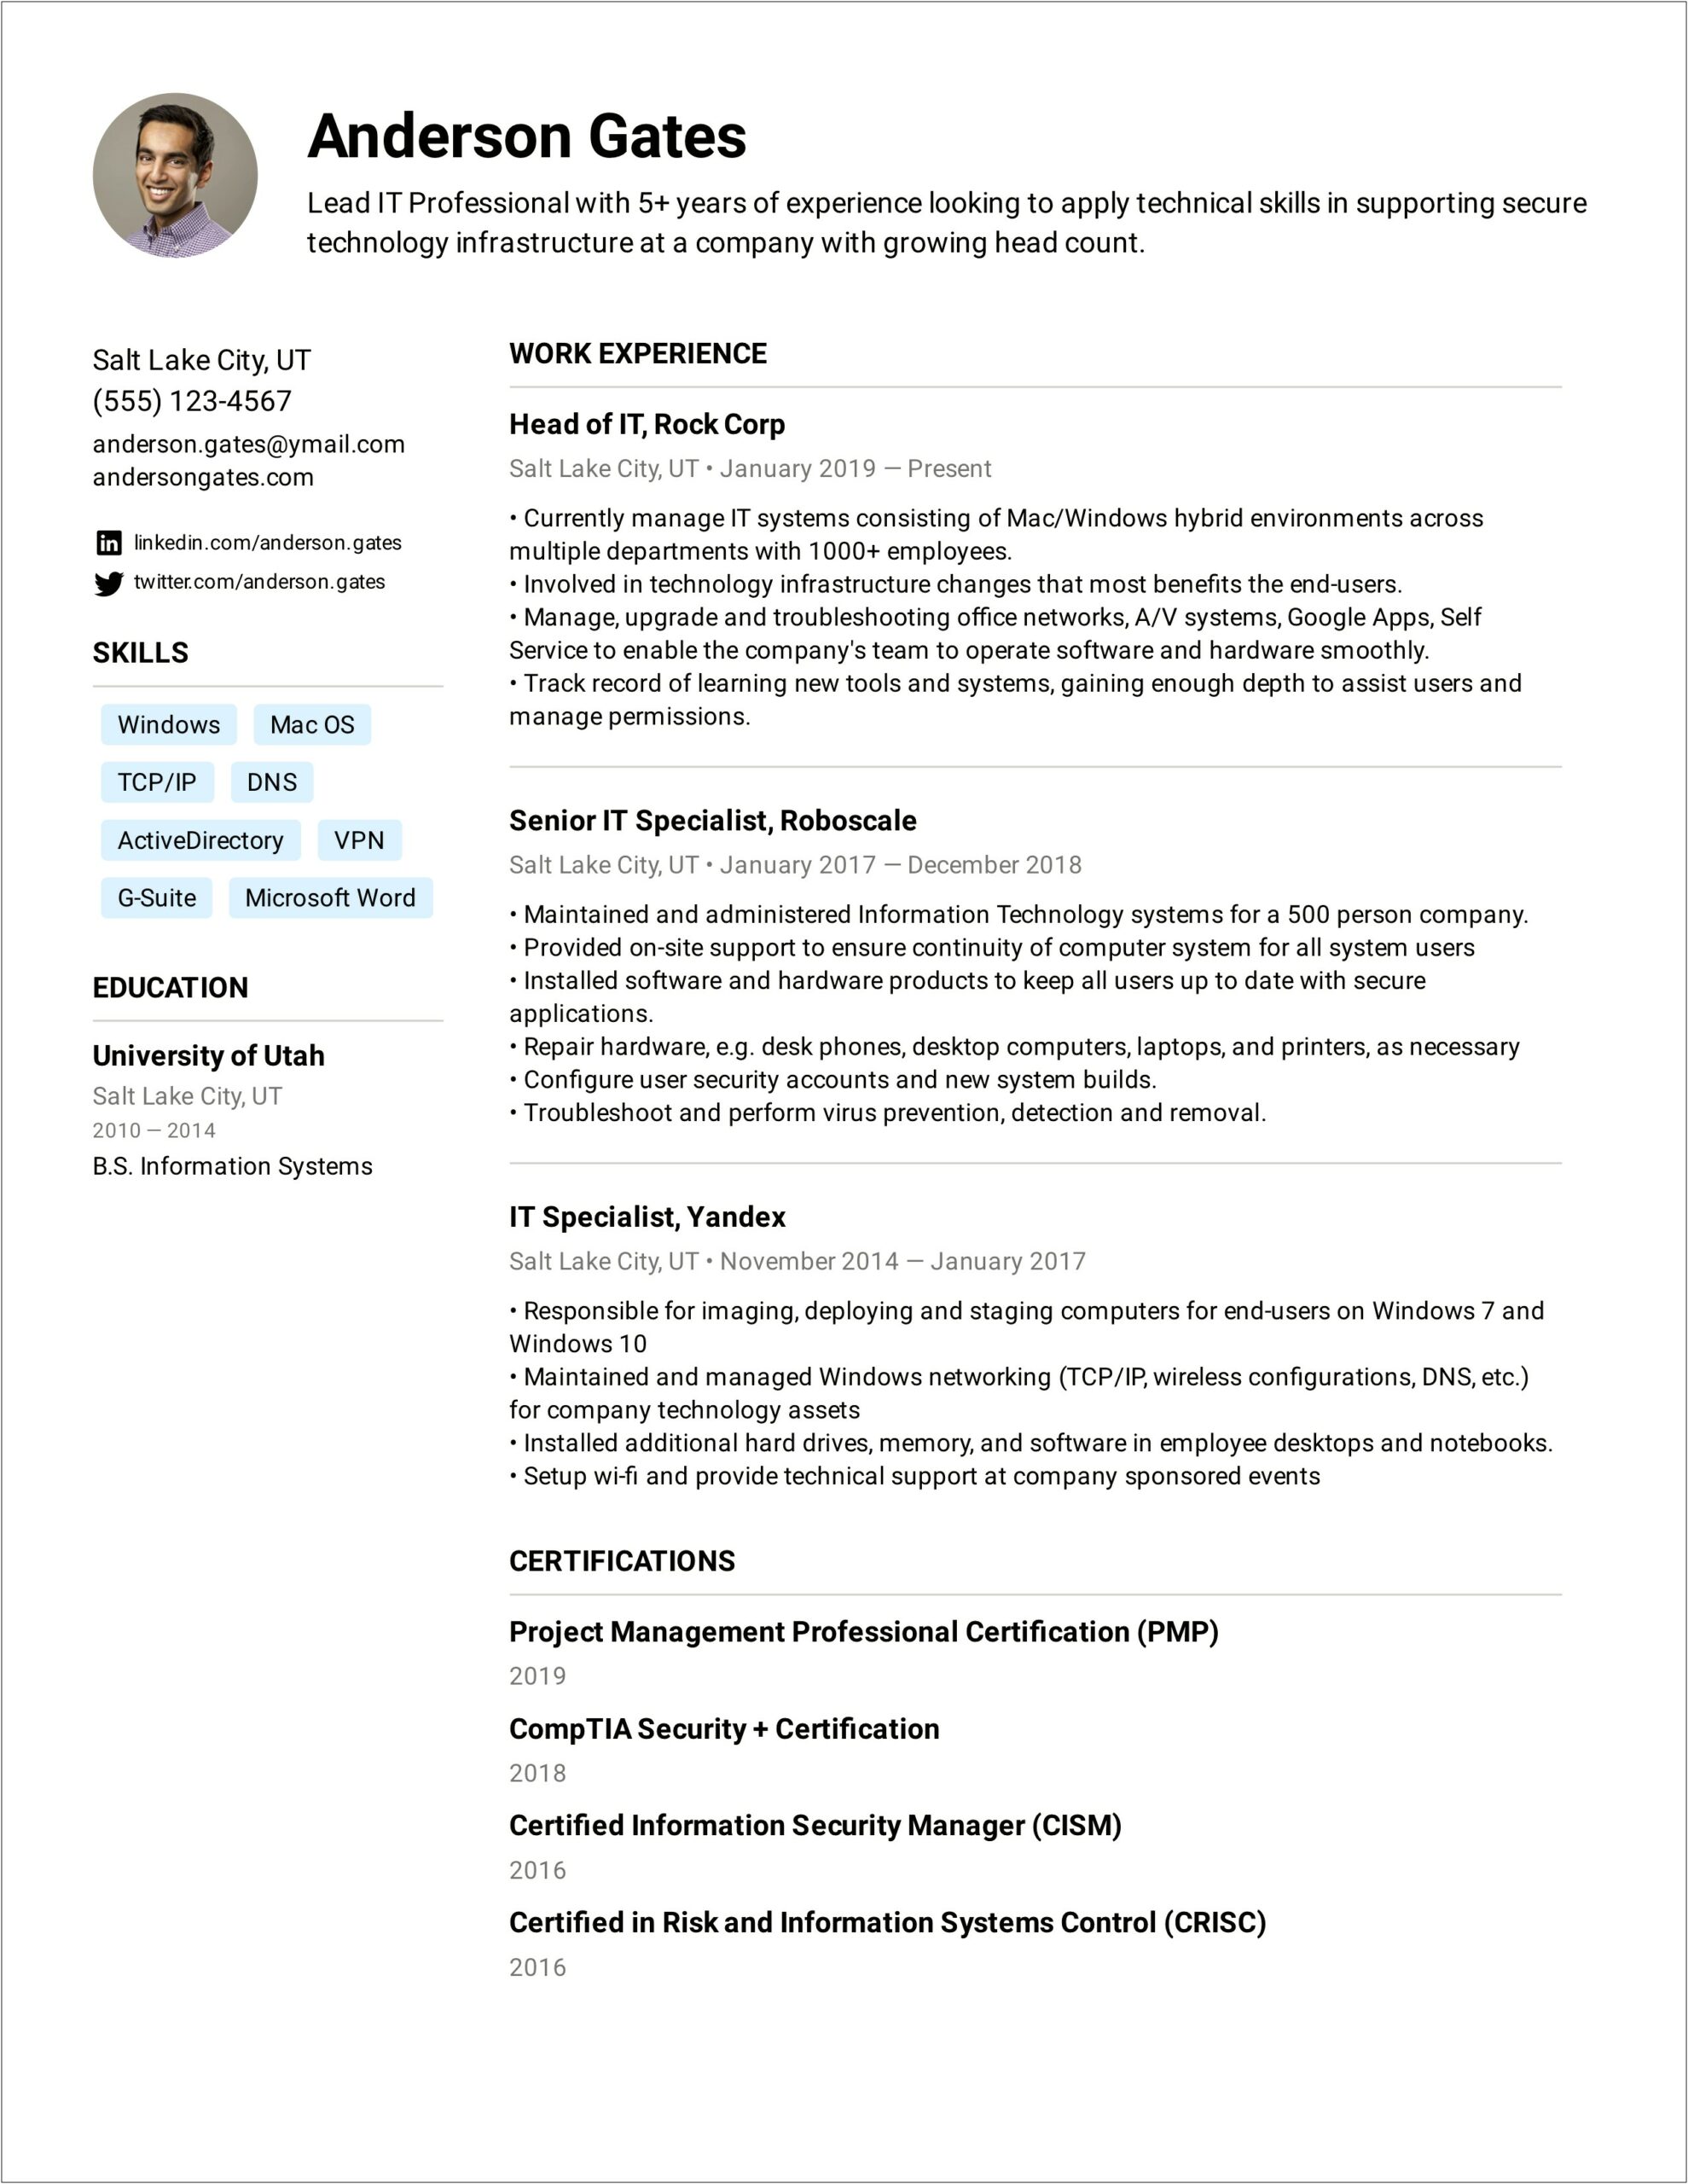 Resume Objective For Technology Specialist